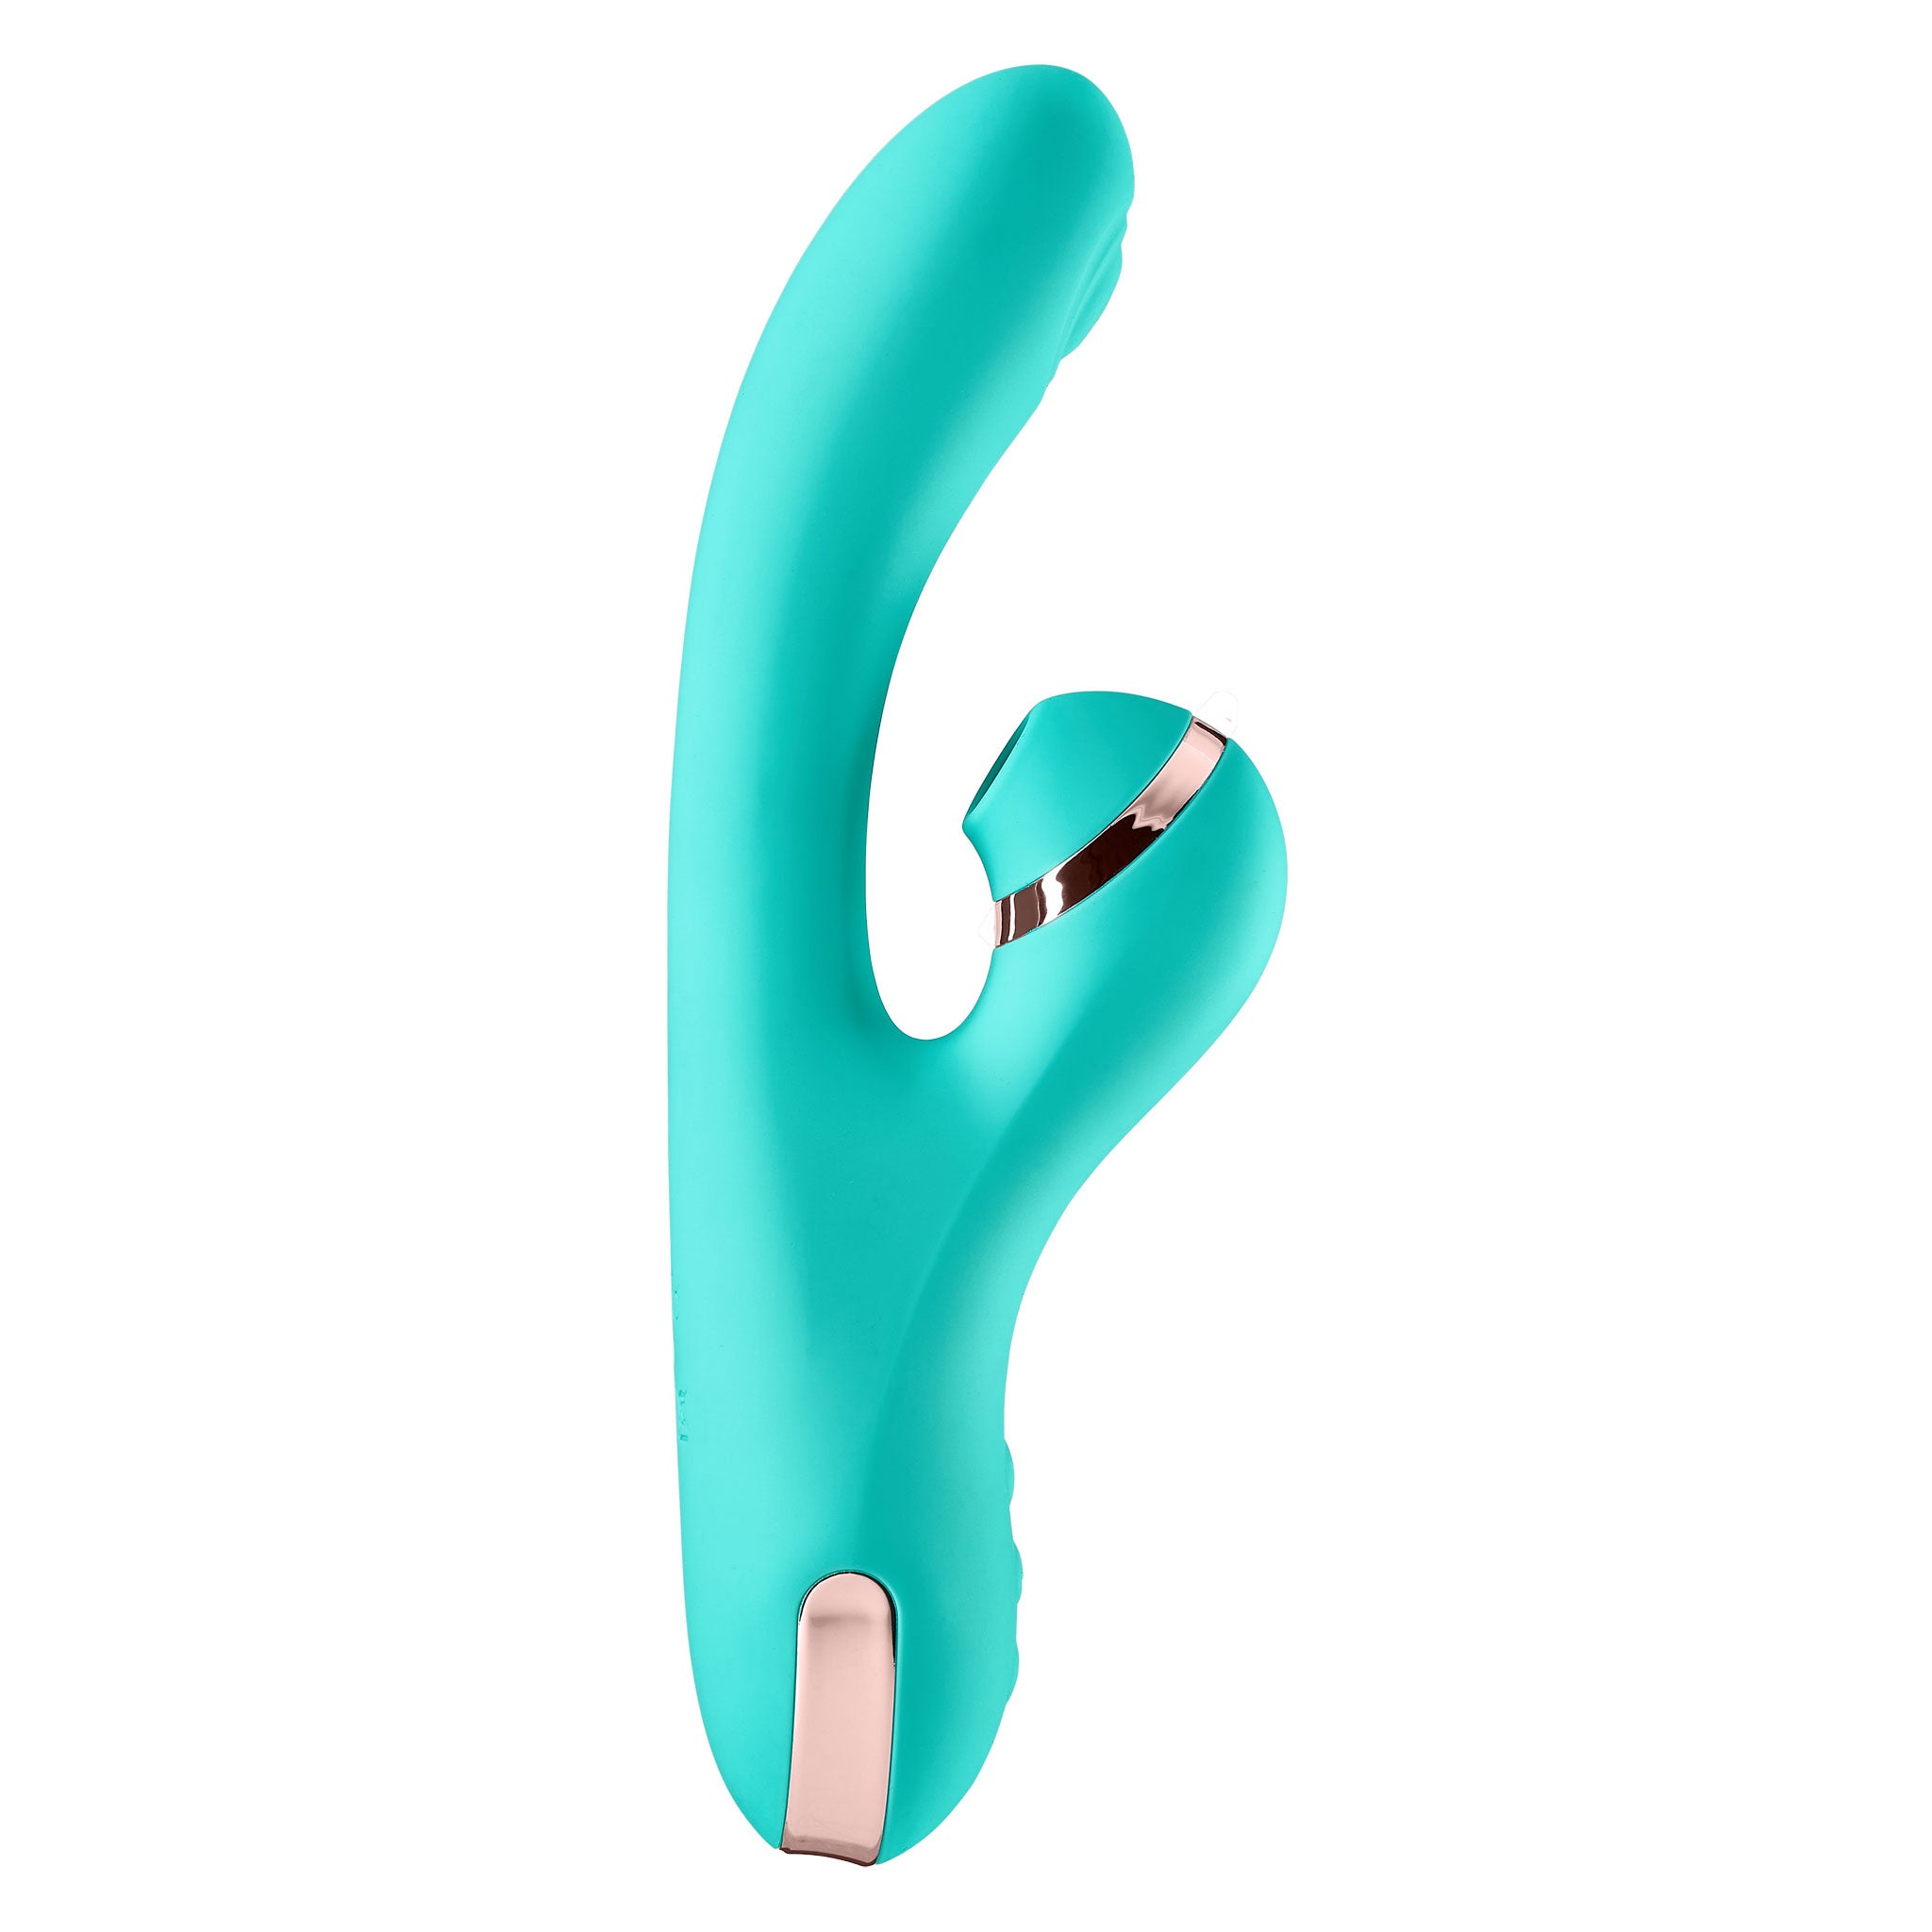 Pro Sensual Series Pulse Touch Air Vibrator - Teal WTC950